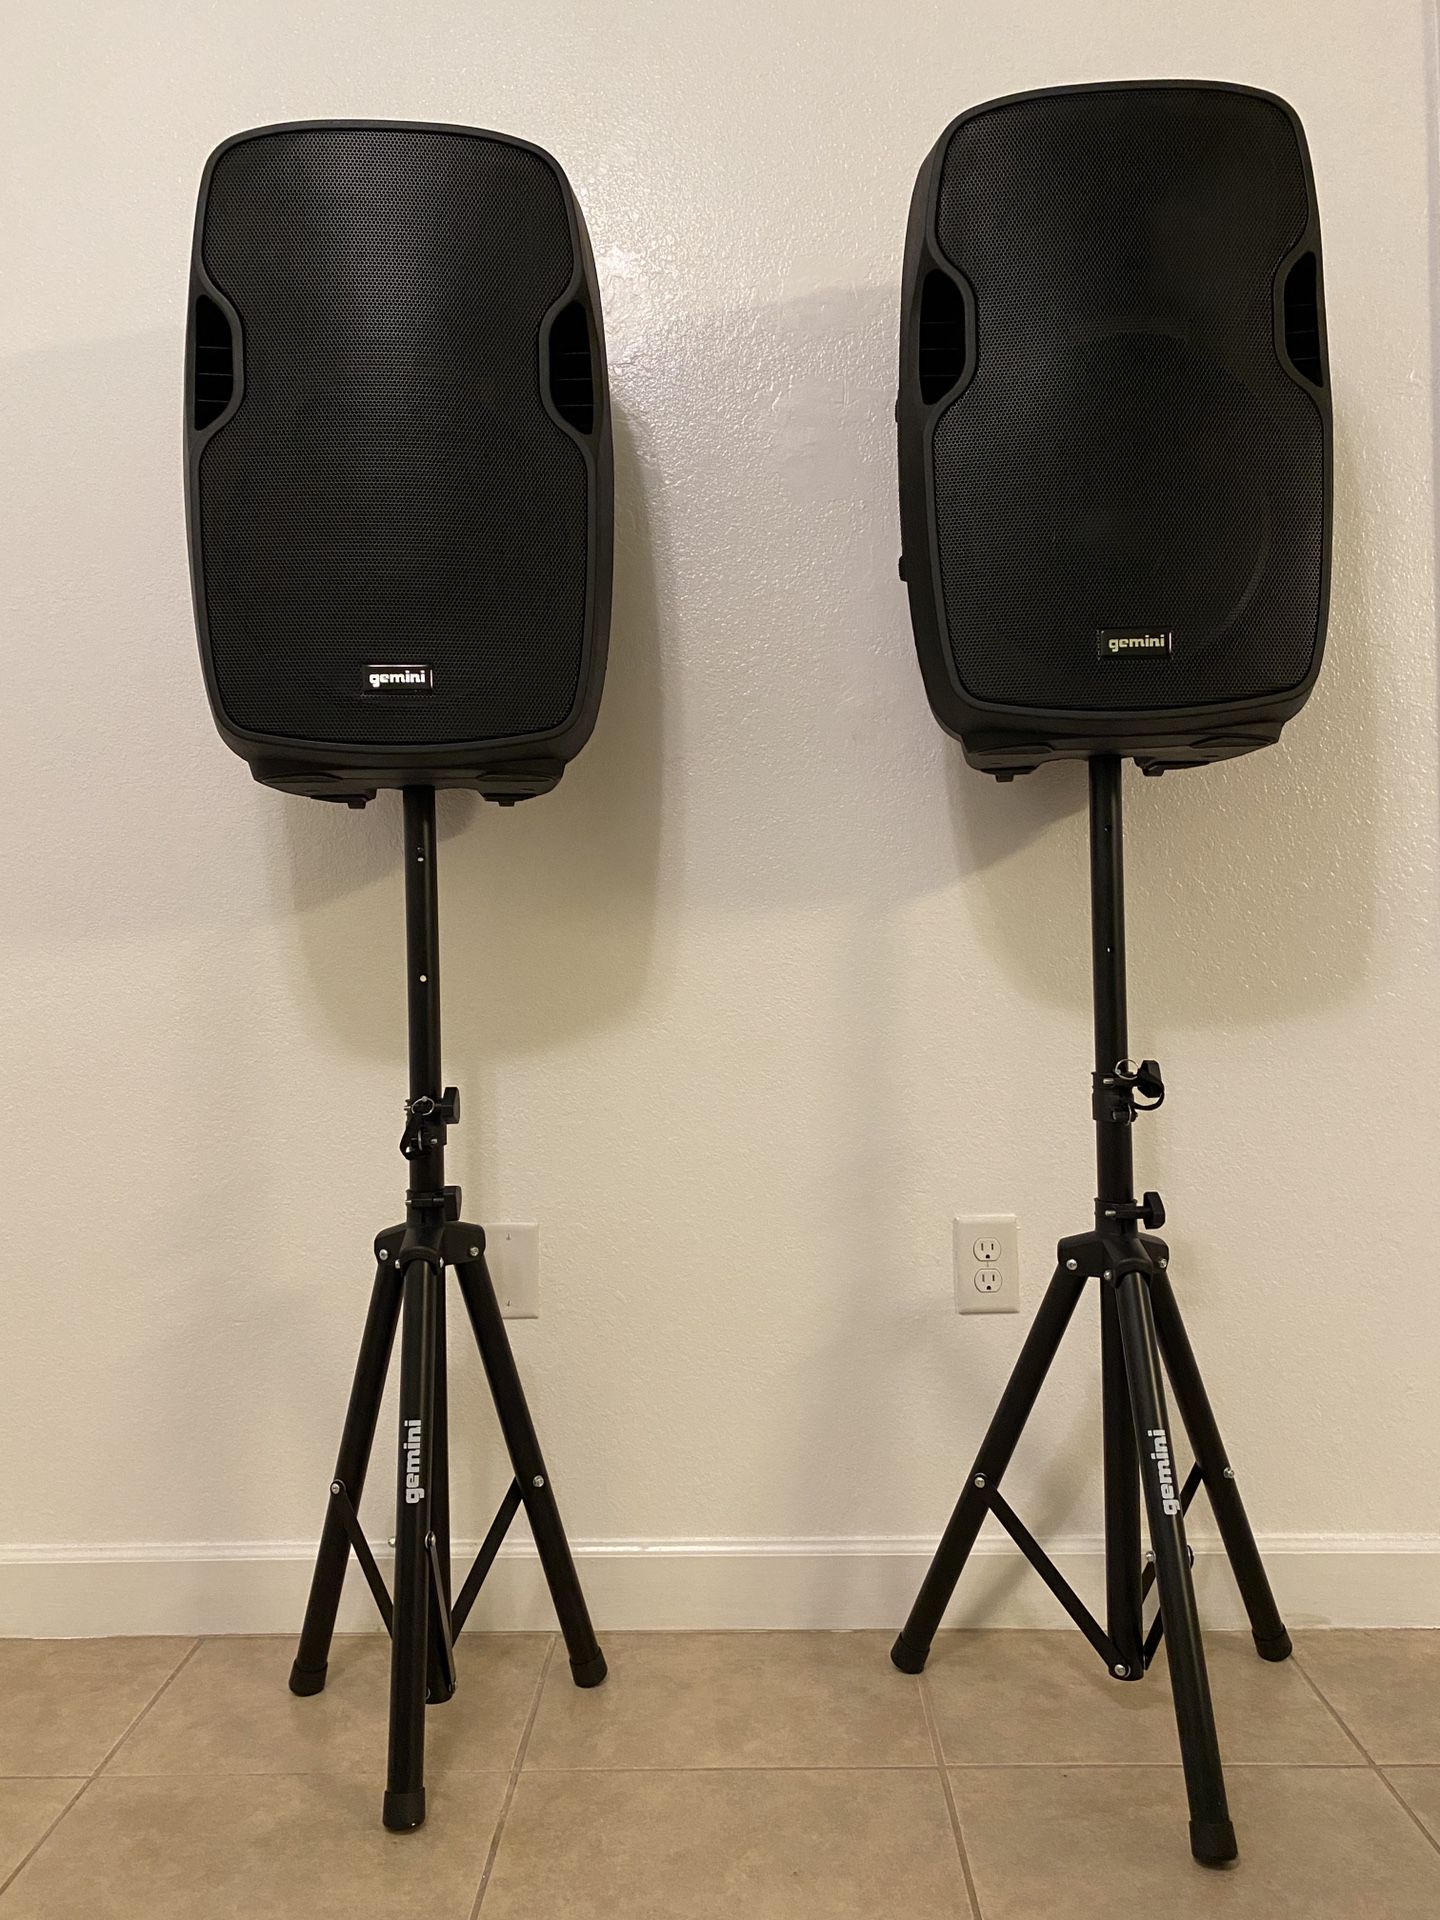 Gemini Powered pair of speaker with microphone and cables